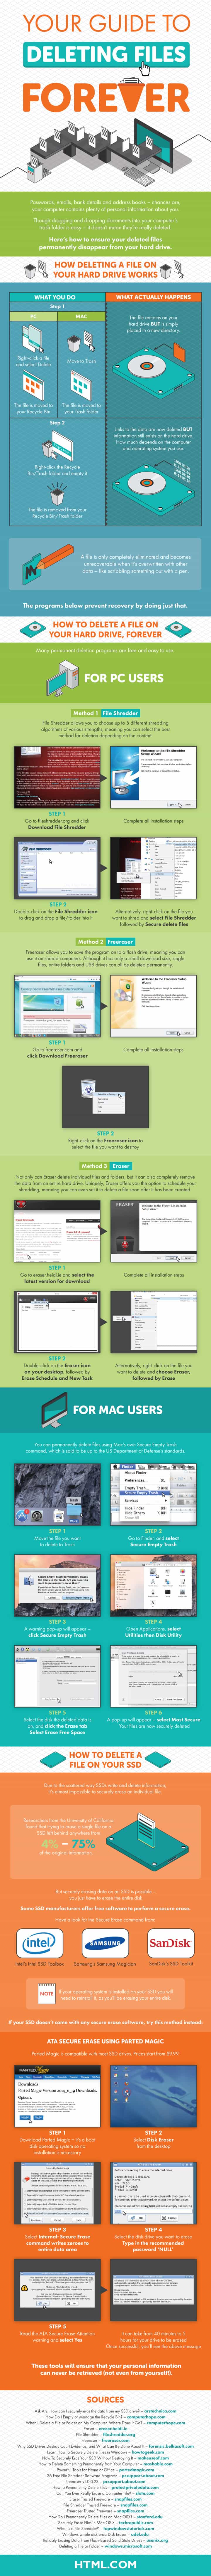 How to delete files forever infographic